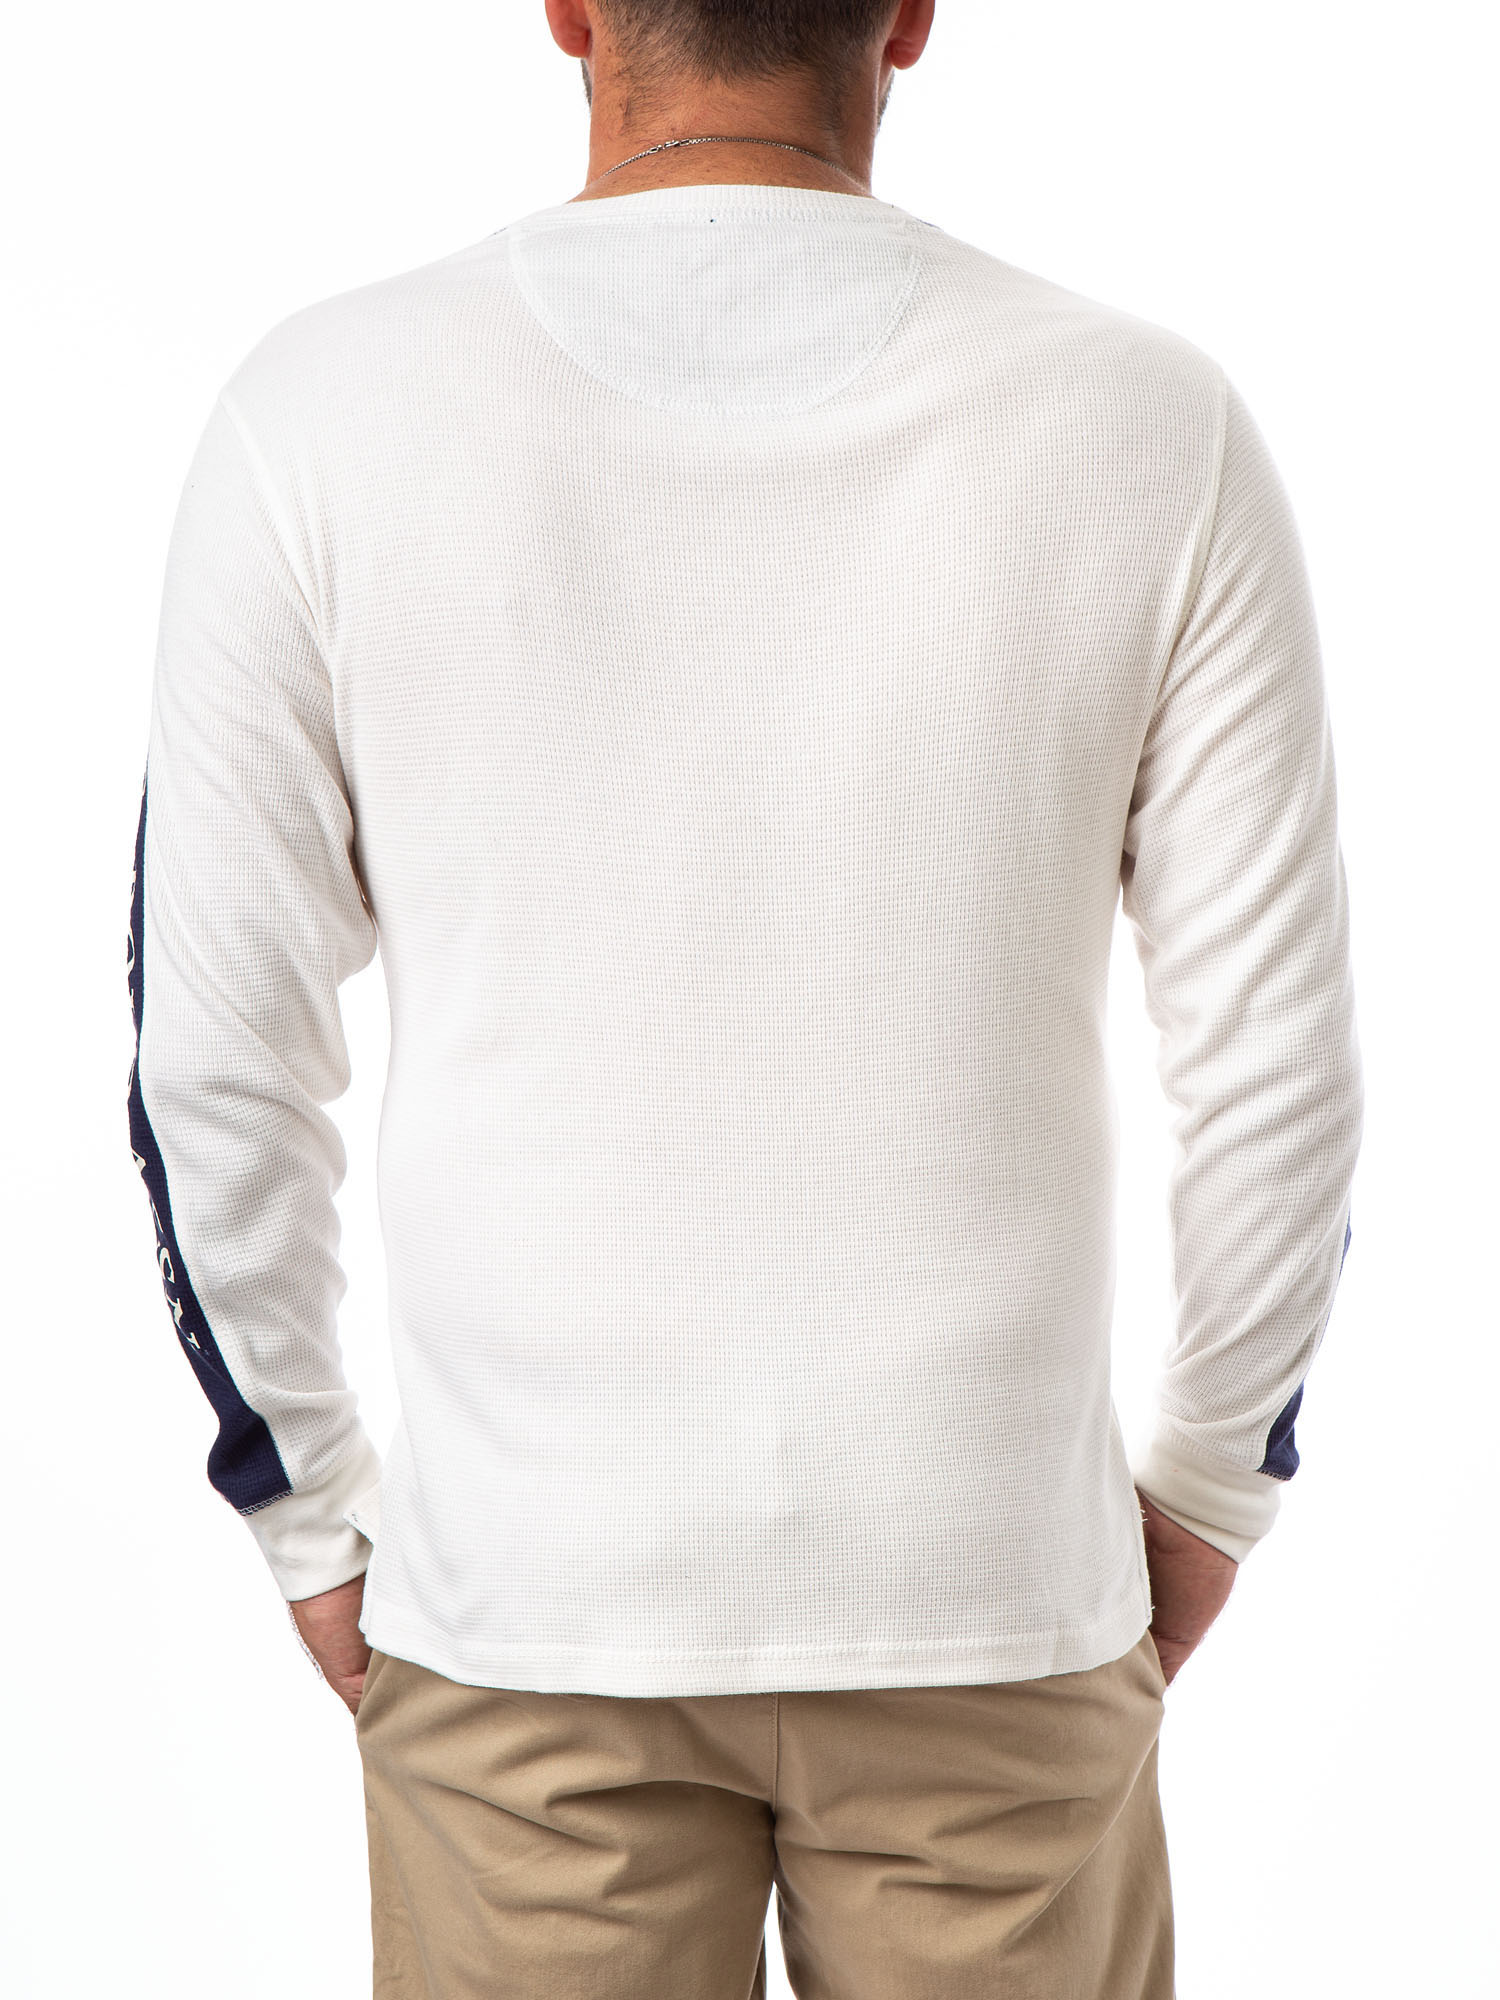 US Polo Assn. Long Sleeve Pullover Crew Neck Relaxed Fit T-Shirt (Men's), 1 Pack - image 3 of 4